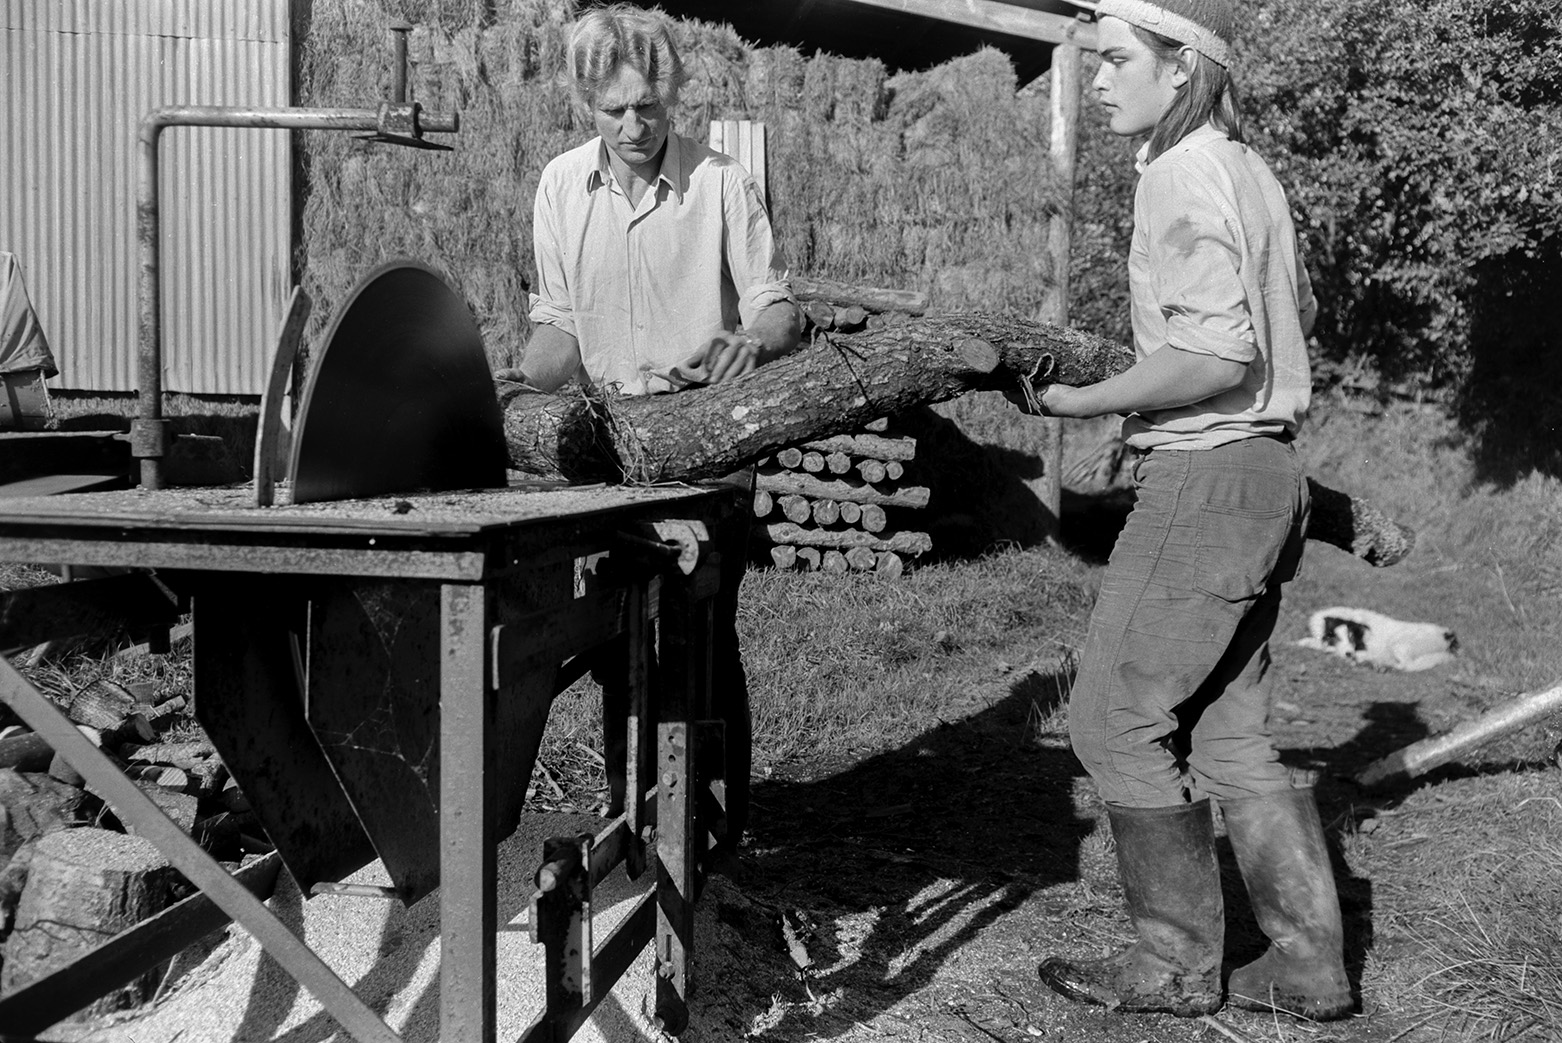 Derek Bright, on the right, helping Ivor Bourne saw logs with a circular saw, in a field at Mill Road Farm, Beaford. A barn with hay bales, and a dog, can be seen in the background.  The farm was also known as Jeffrys.